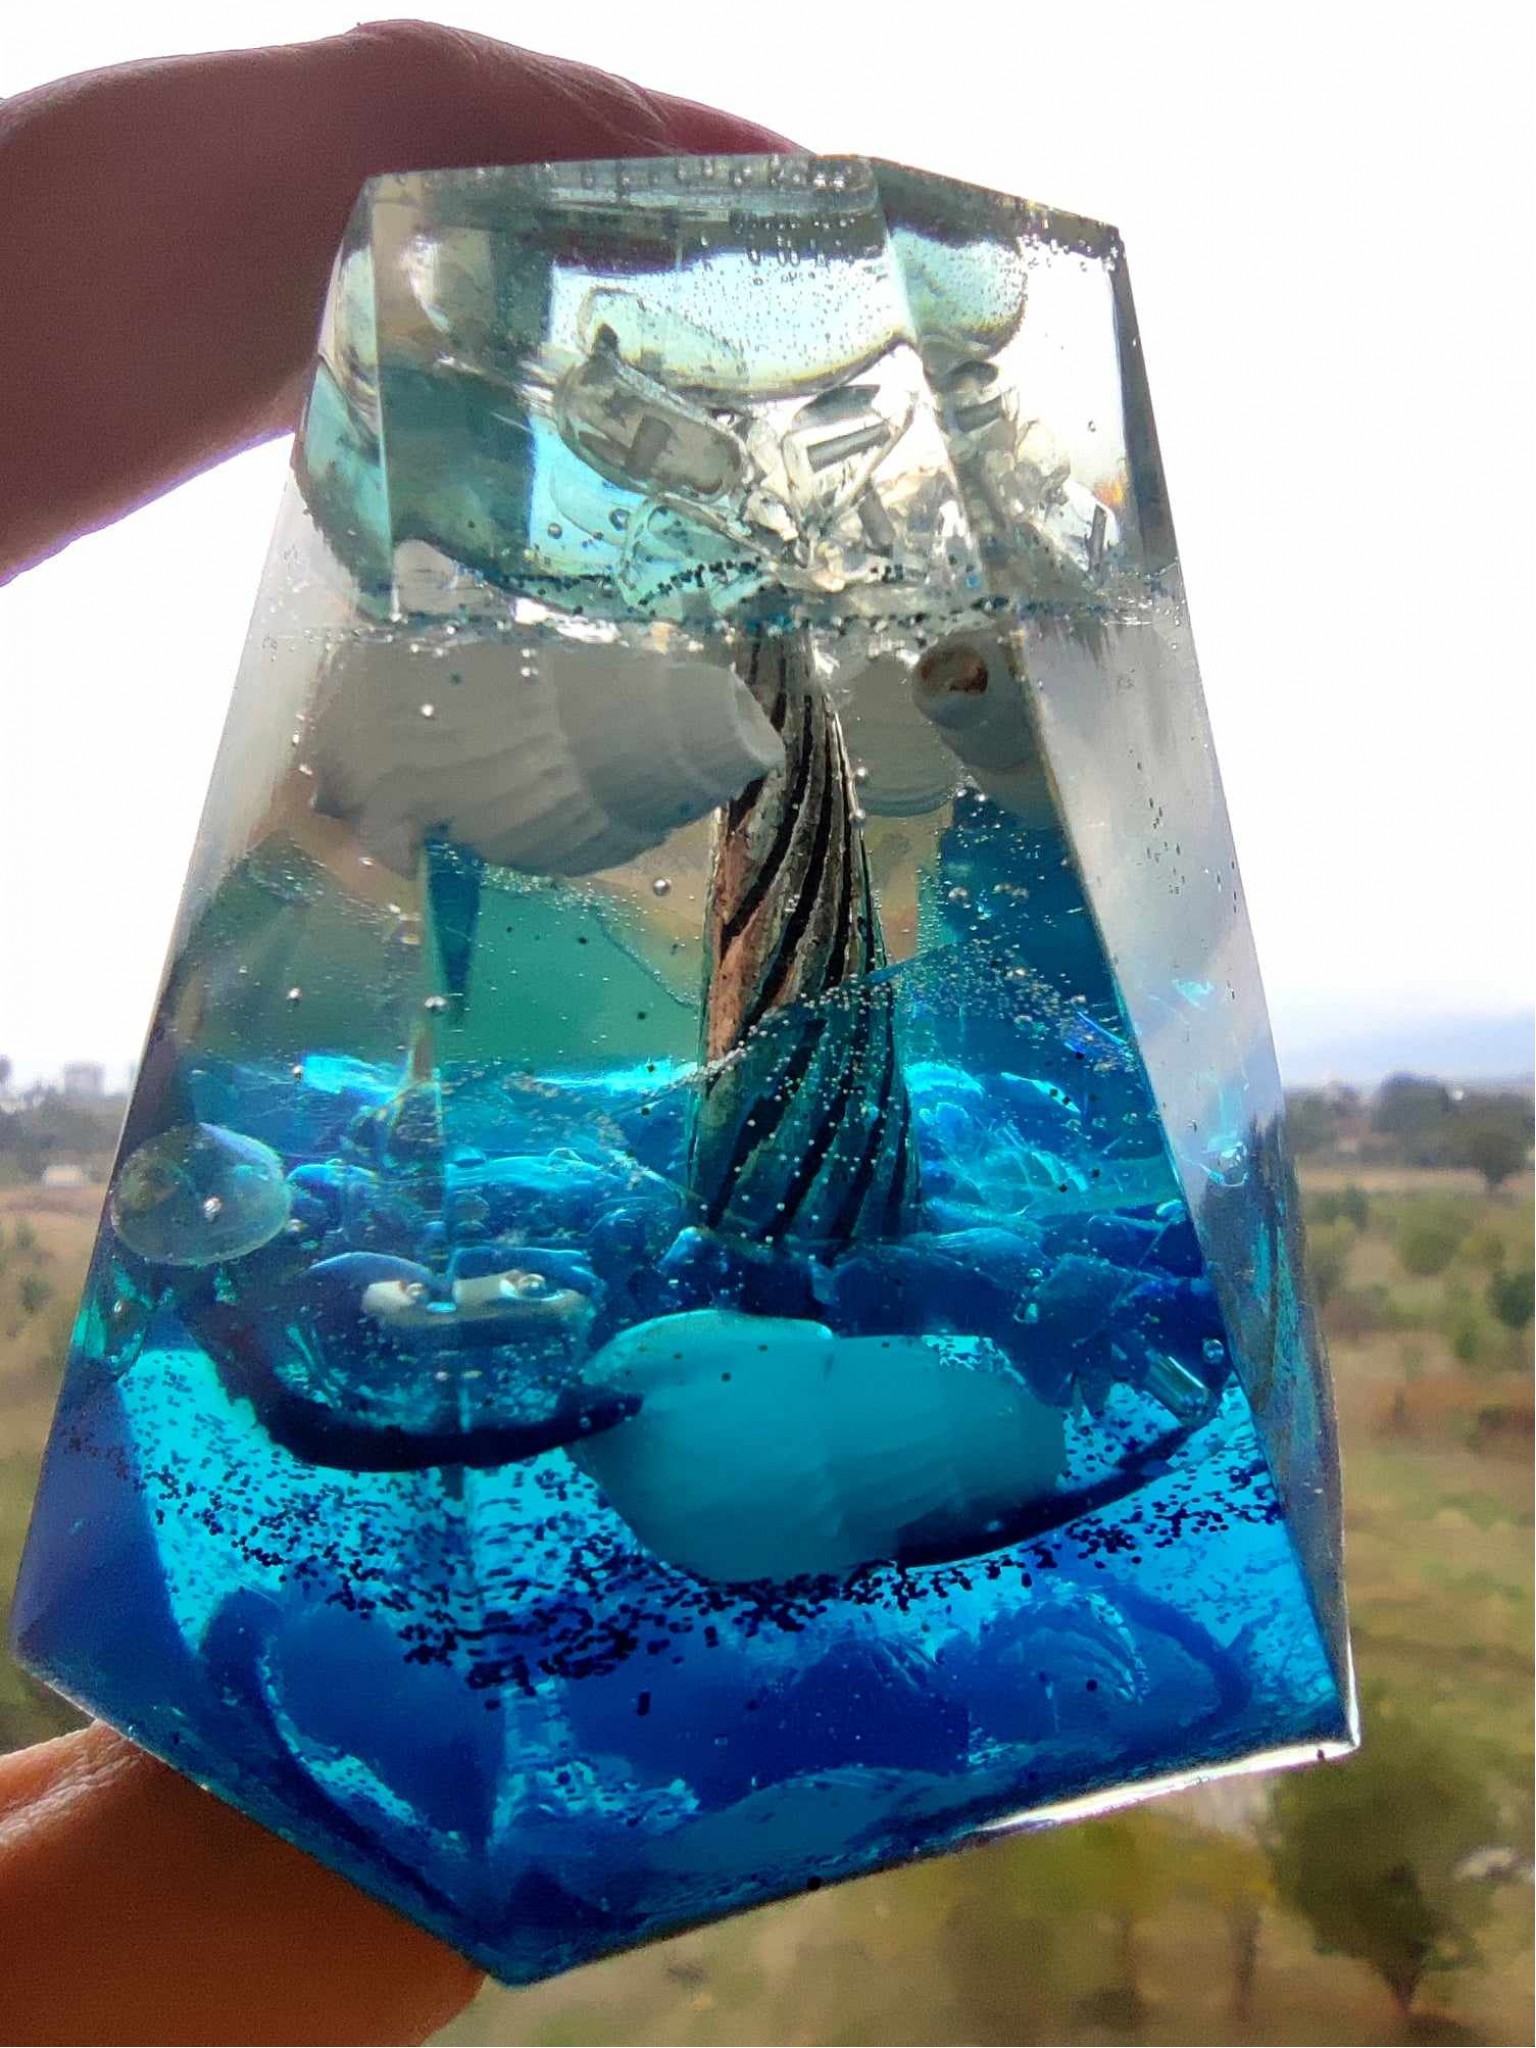 Orgonite for protecting the home from negative energy - "Water magic"